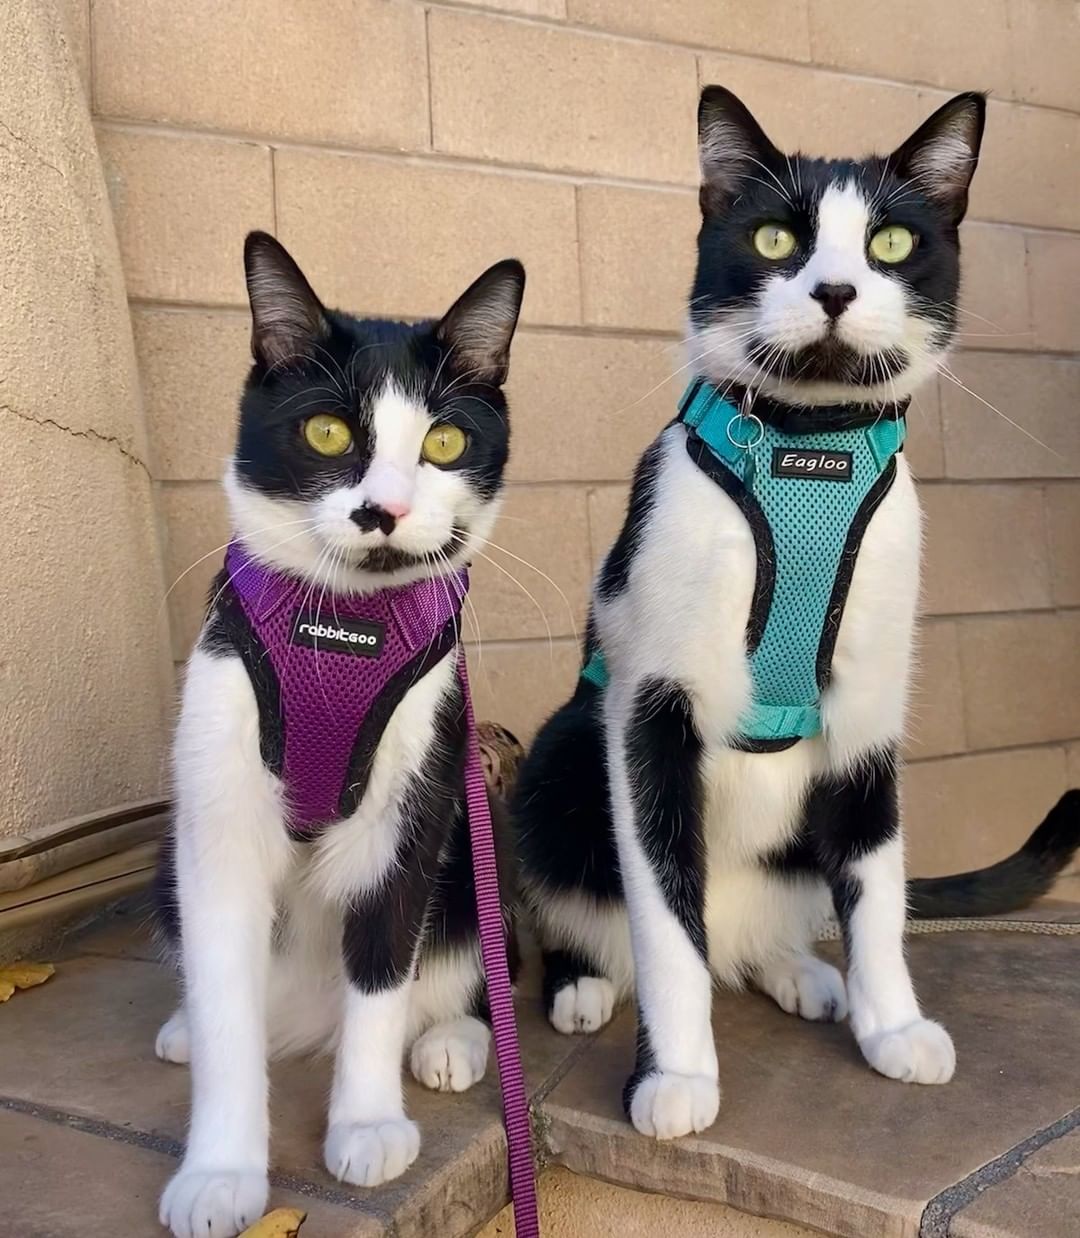 Nike (in the blue vest) was adopted from NMAF two years ago.  His mom keeps us up-to-date on his life (which we love). Here he is with his buddy (they almost look like twins)! 

<a target='_blank' href='https://www.instagram.com/explore/tags/newmexicoanimalfriends/'>#newmexicoanimalfriends</a> <a target='_blank' href='https://www.instagram.com/explore/tags/adopt/'>#adopt</a> <a target='_blank' href='https://www.instagram.com/explore/tags/rescue/'>#rescue</a>